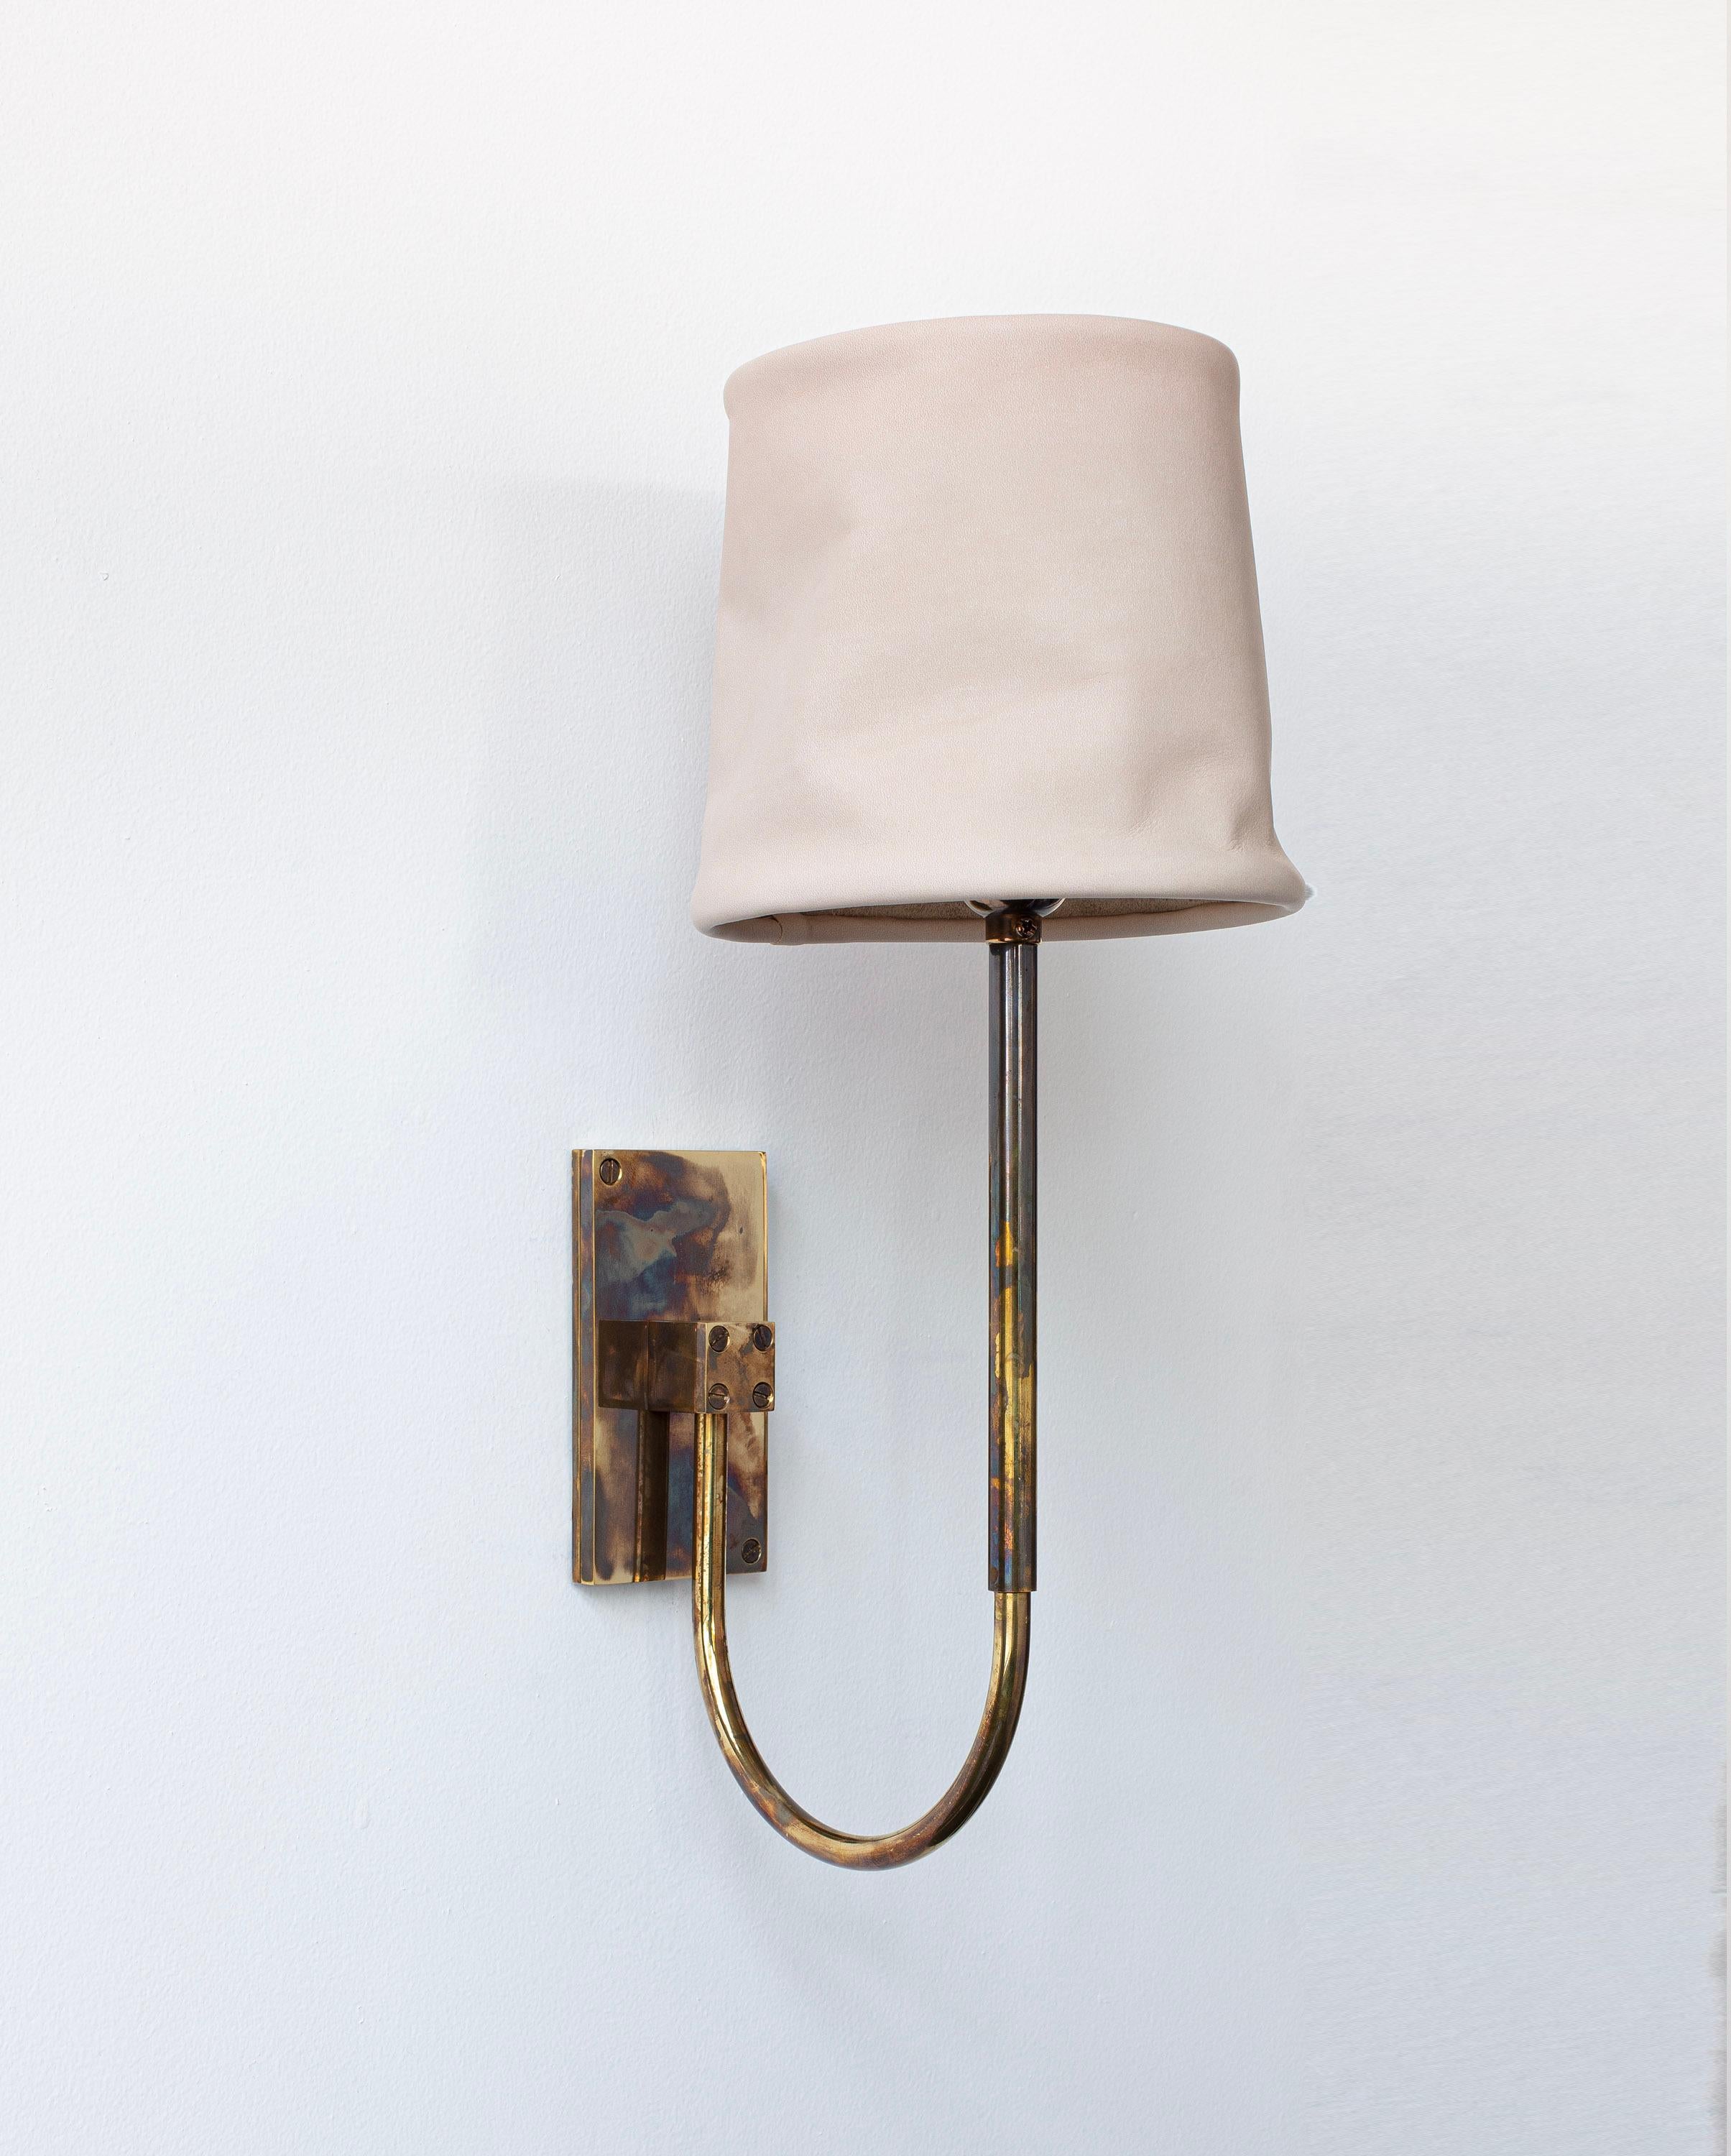 American Series01 Upright Sconce, Smoke Acid Patinated Brass, Blush pink Leather Shade For Sale